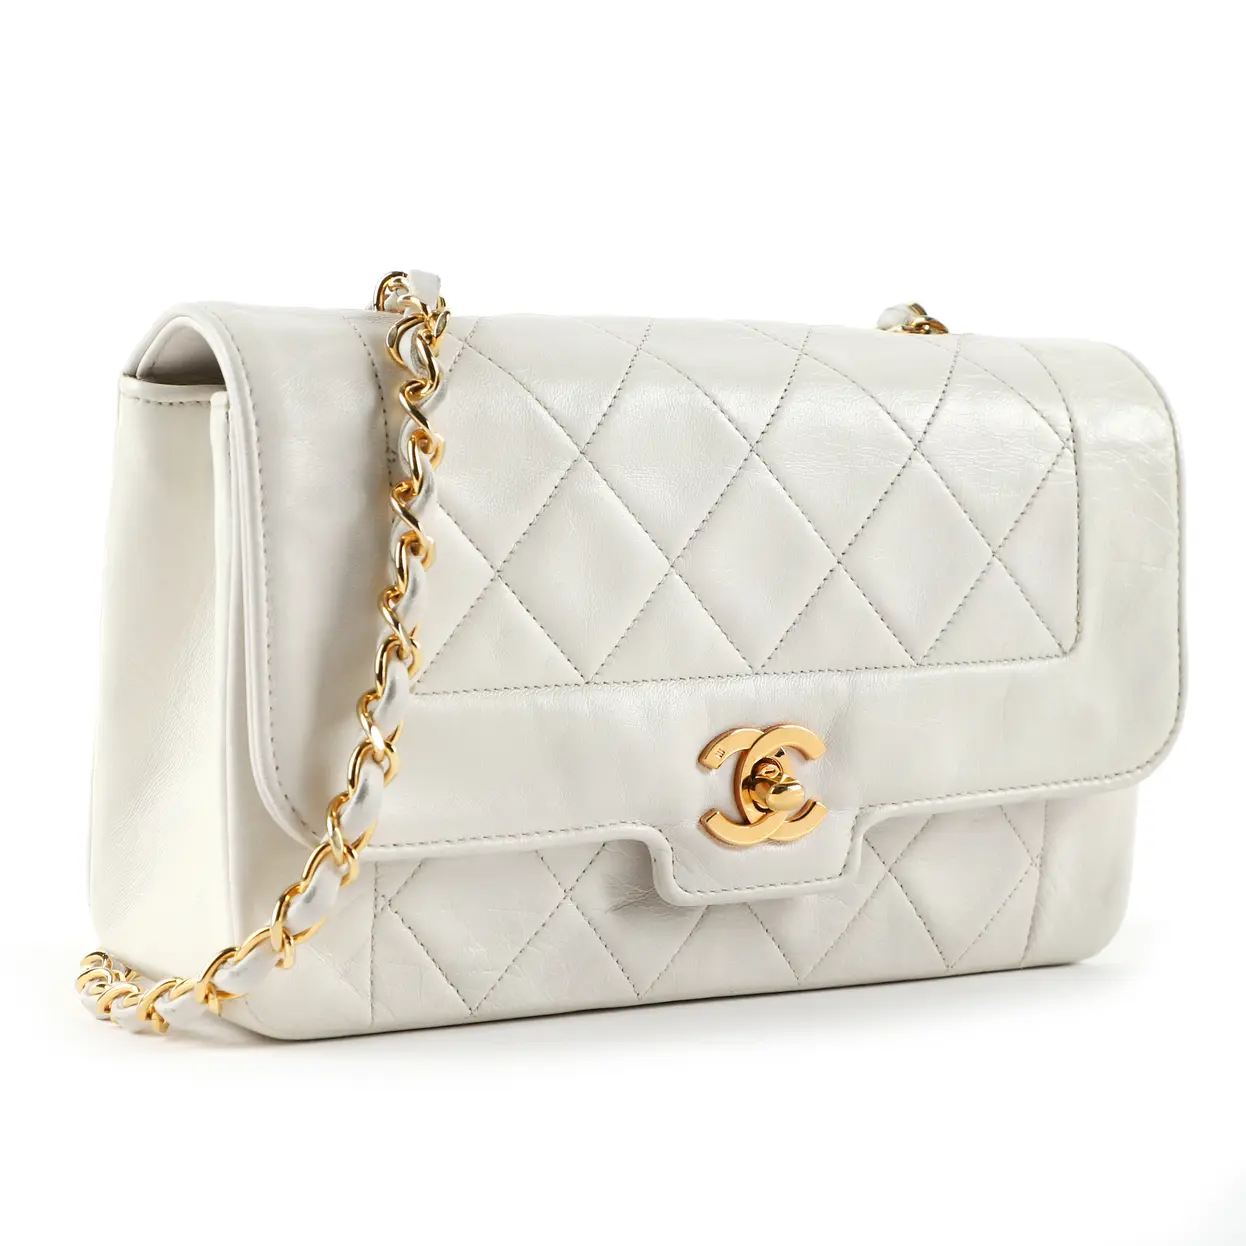 Buy Chanel Timeless/Classique leather crossbody bag online - Vintage